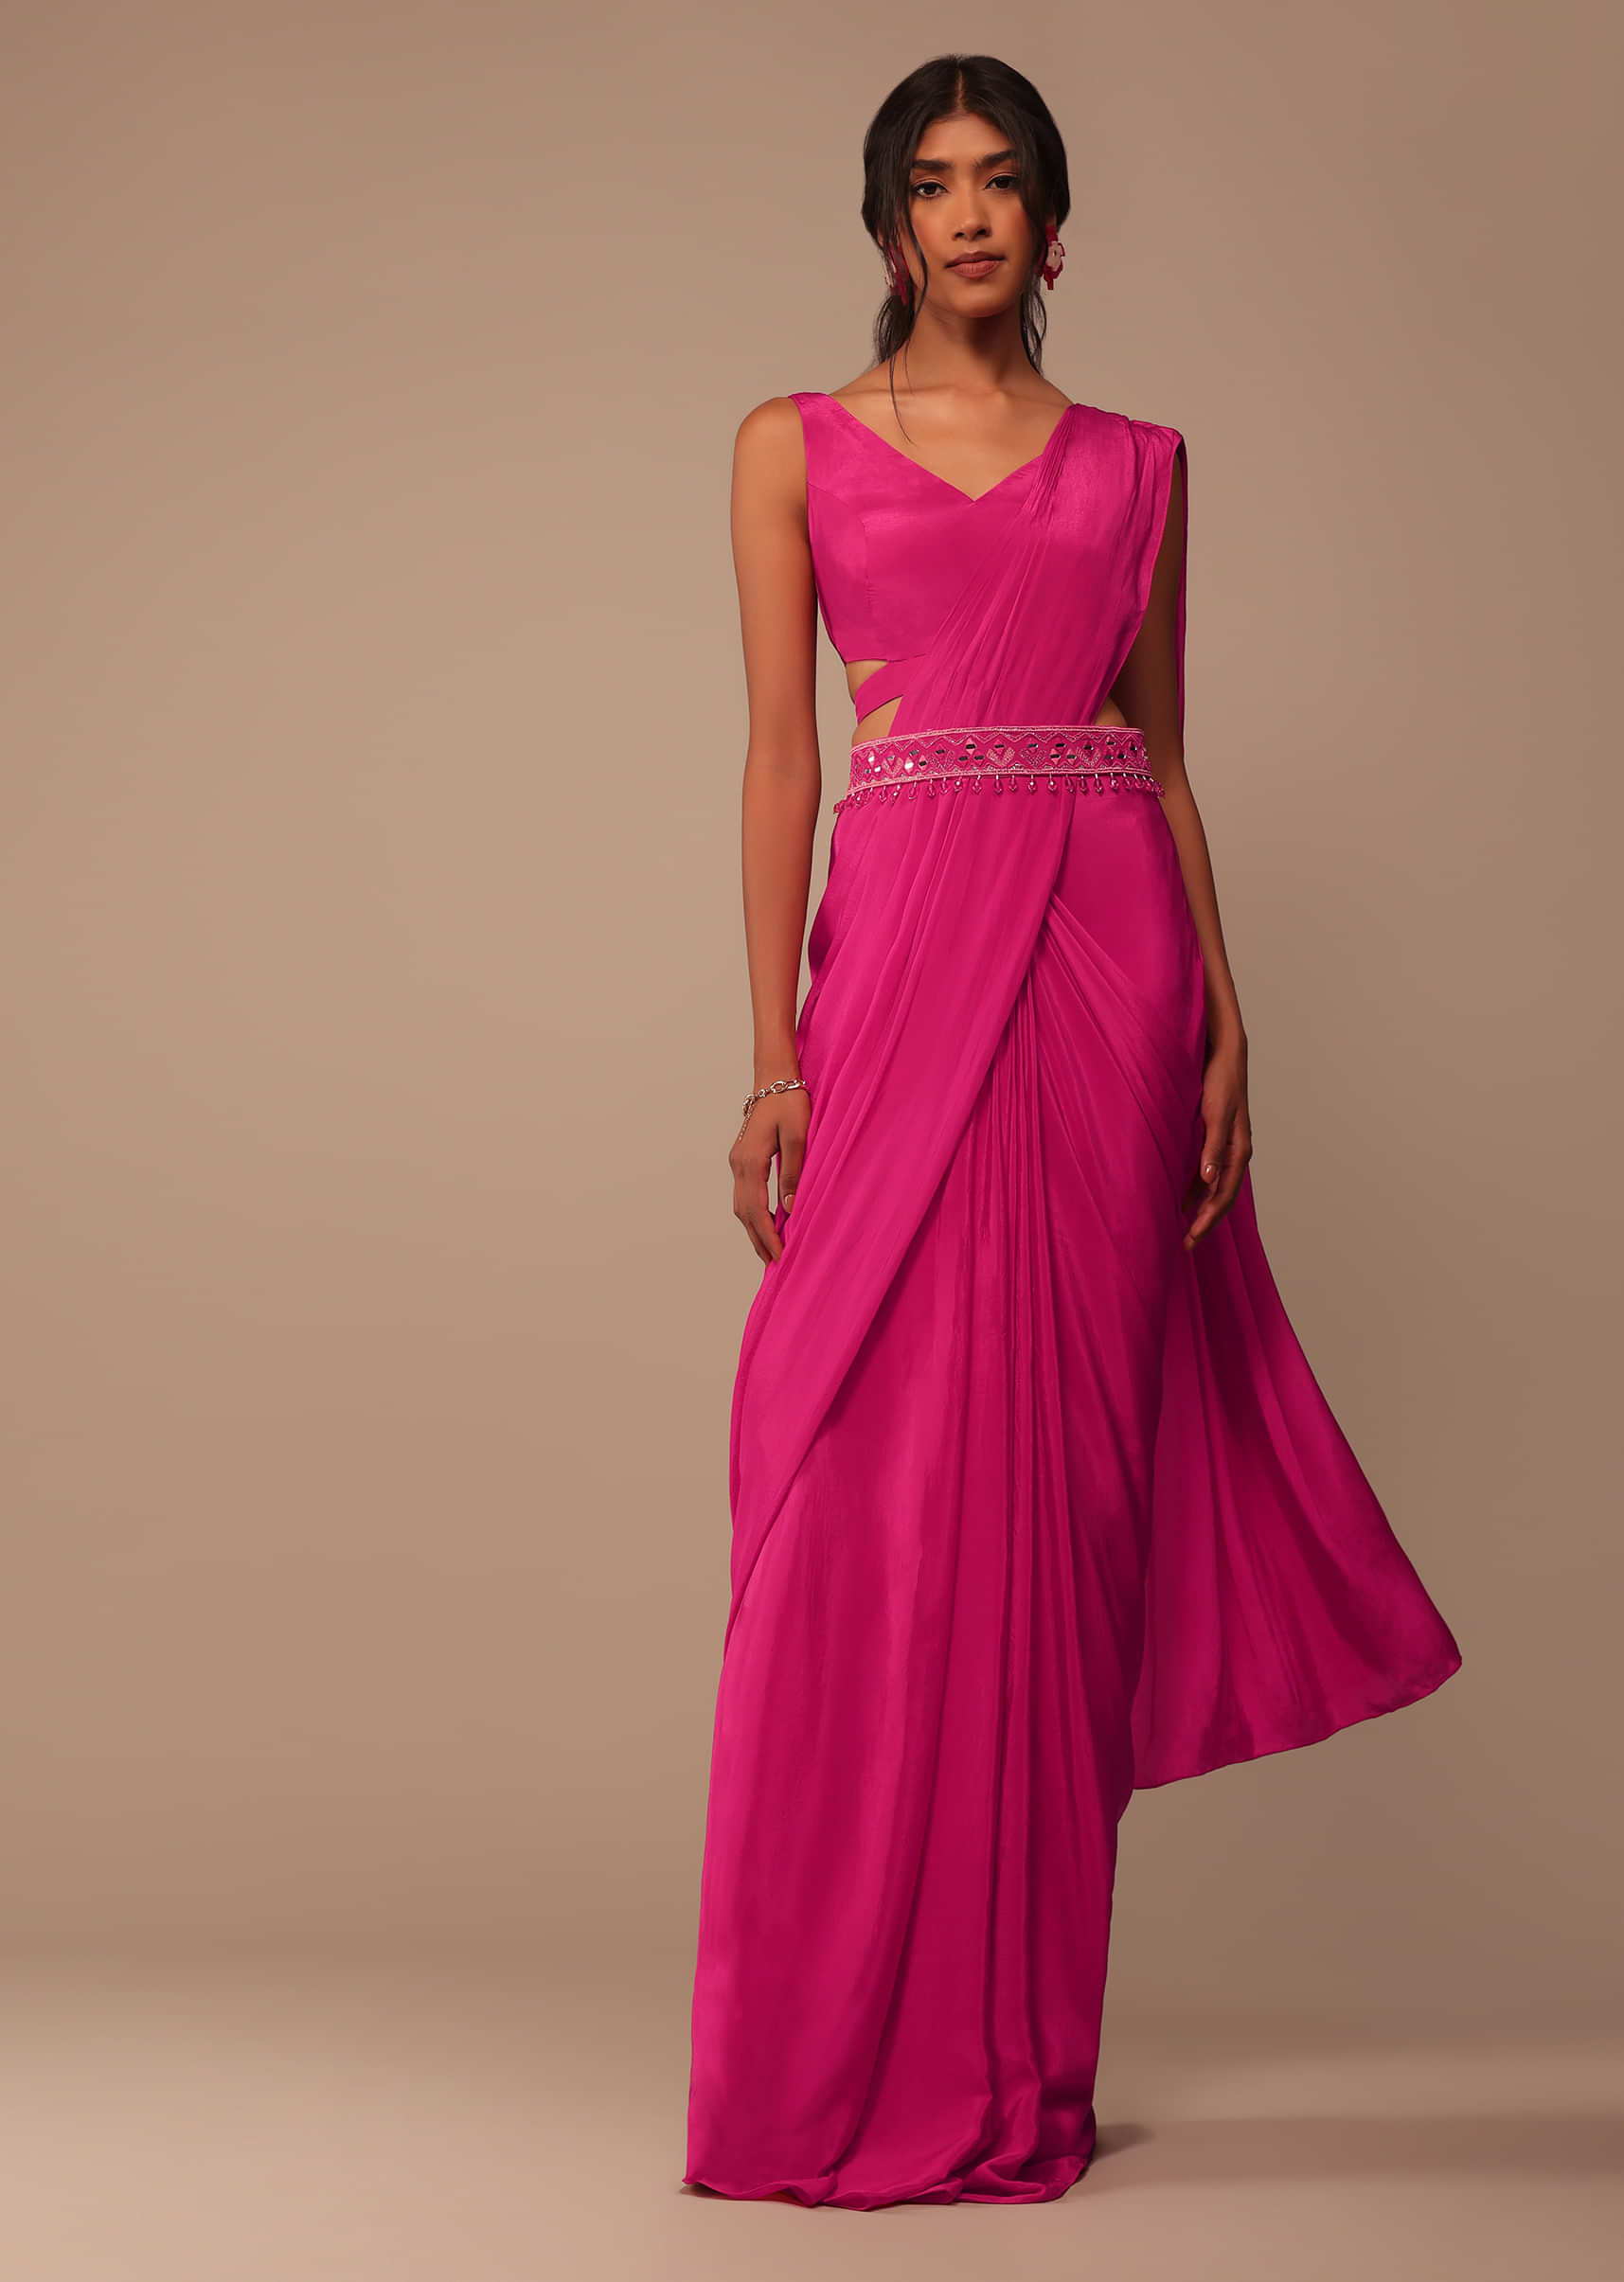 Buy Dark Pink Waist Belt: The Ultimate Saree Belt for Effortless Style and  Comfort(20) at